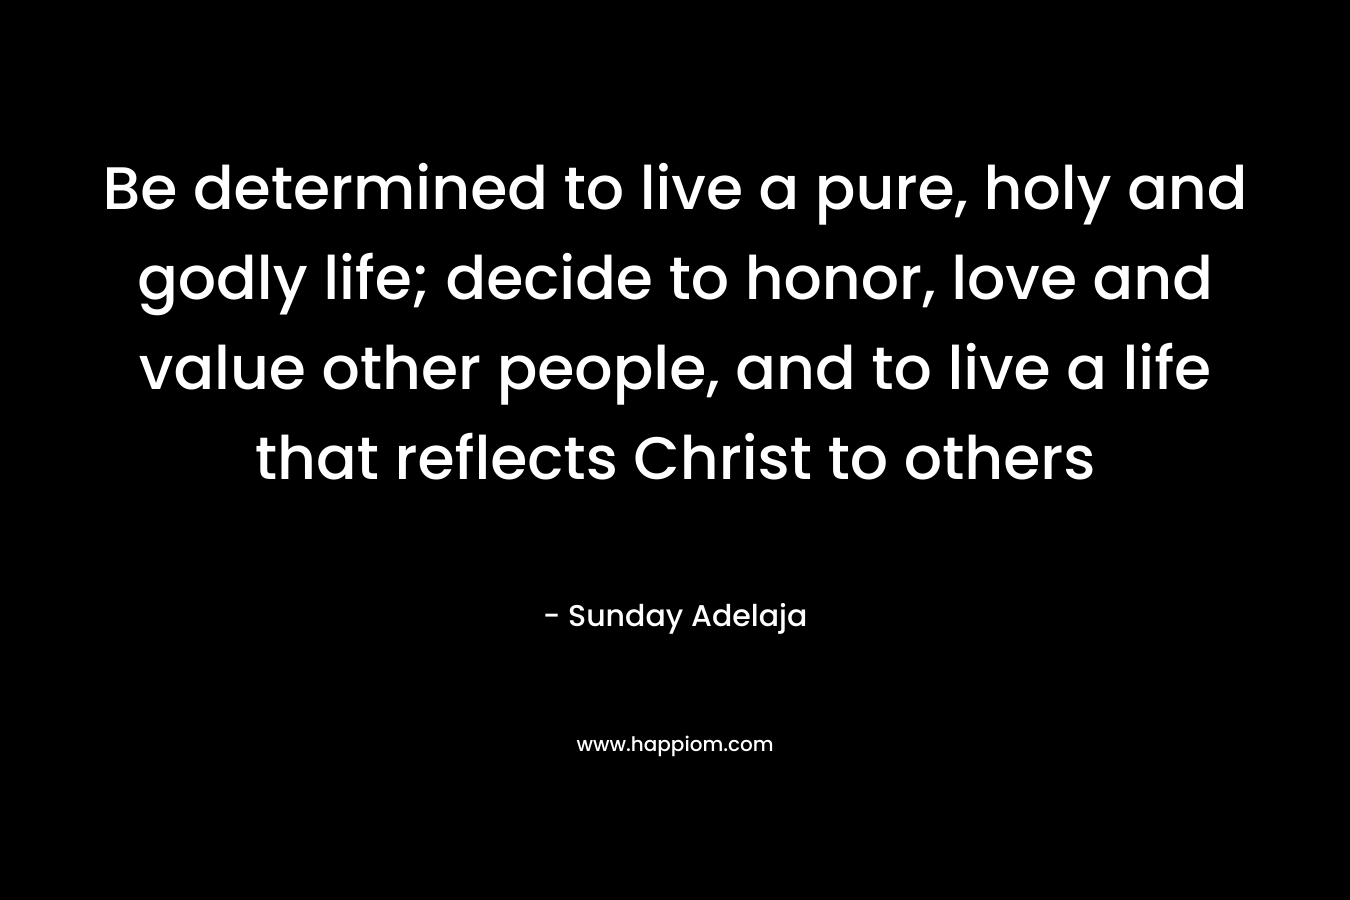 Be determined to live a pure, holy and godly life; decide to honor, love and value other people, and to live a life that reflects Christ to others – Sunday Adelaja